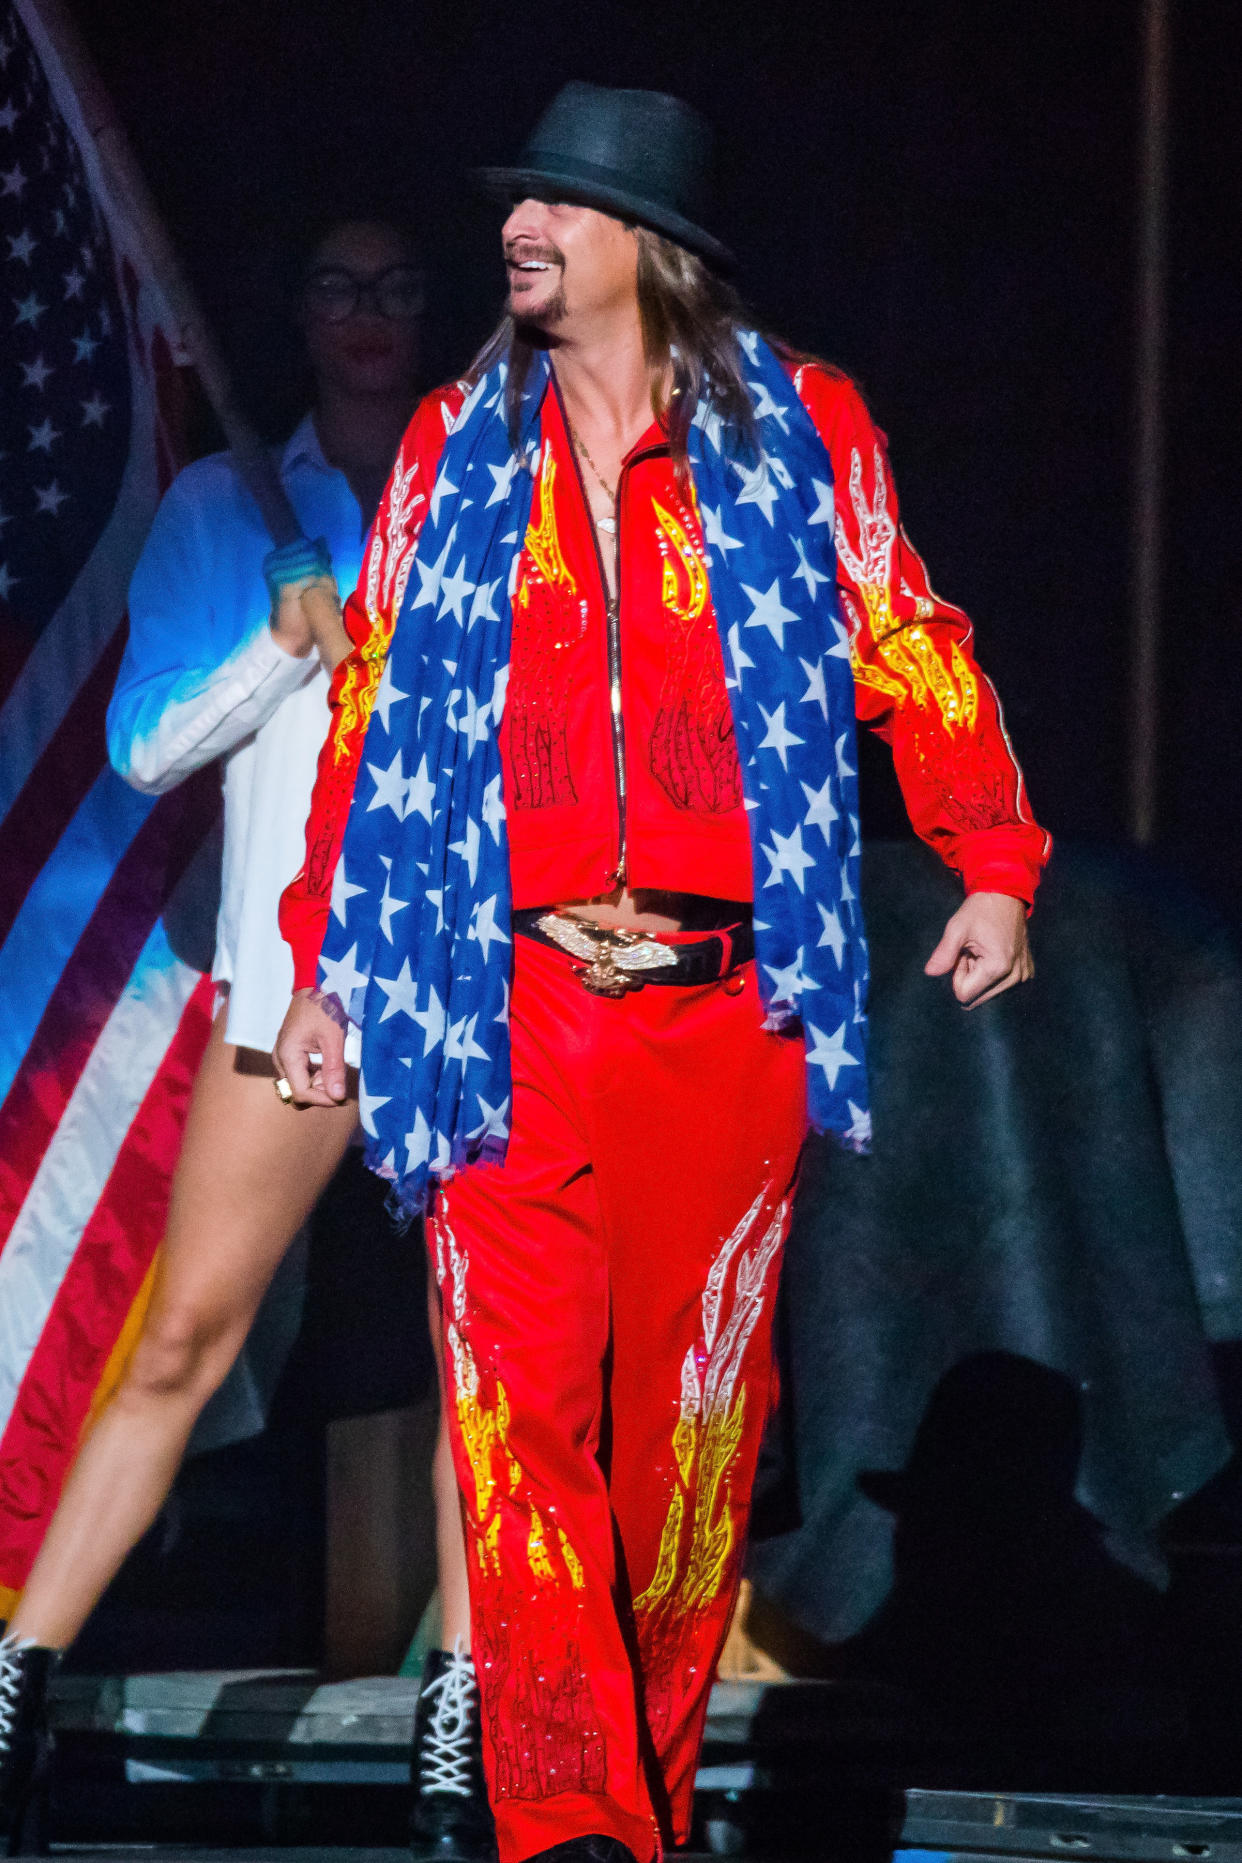 DETROIT, MI - SEPTEMBER 20:  Kid Rock performs at Little Caesars Arena on September 20, 2017 in Detroit, Michigan.  (Photo by Scott Legato/Getty Images)